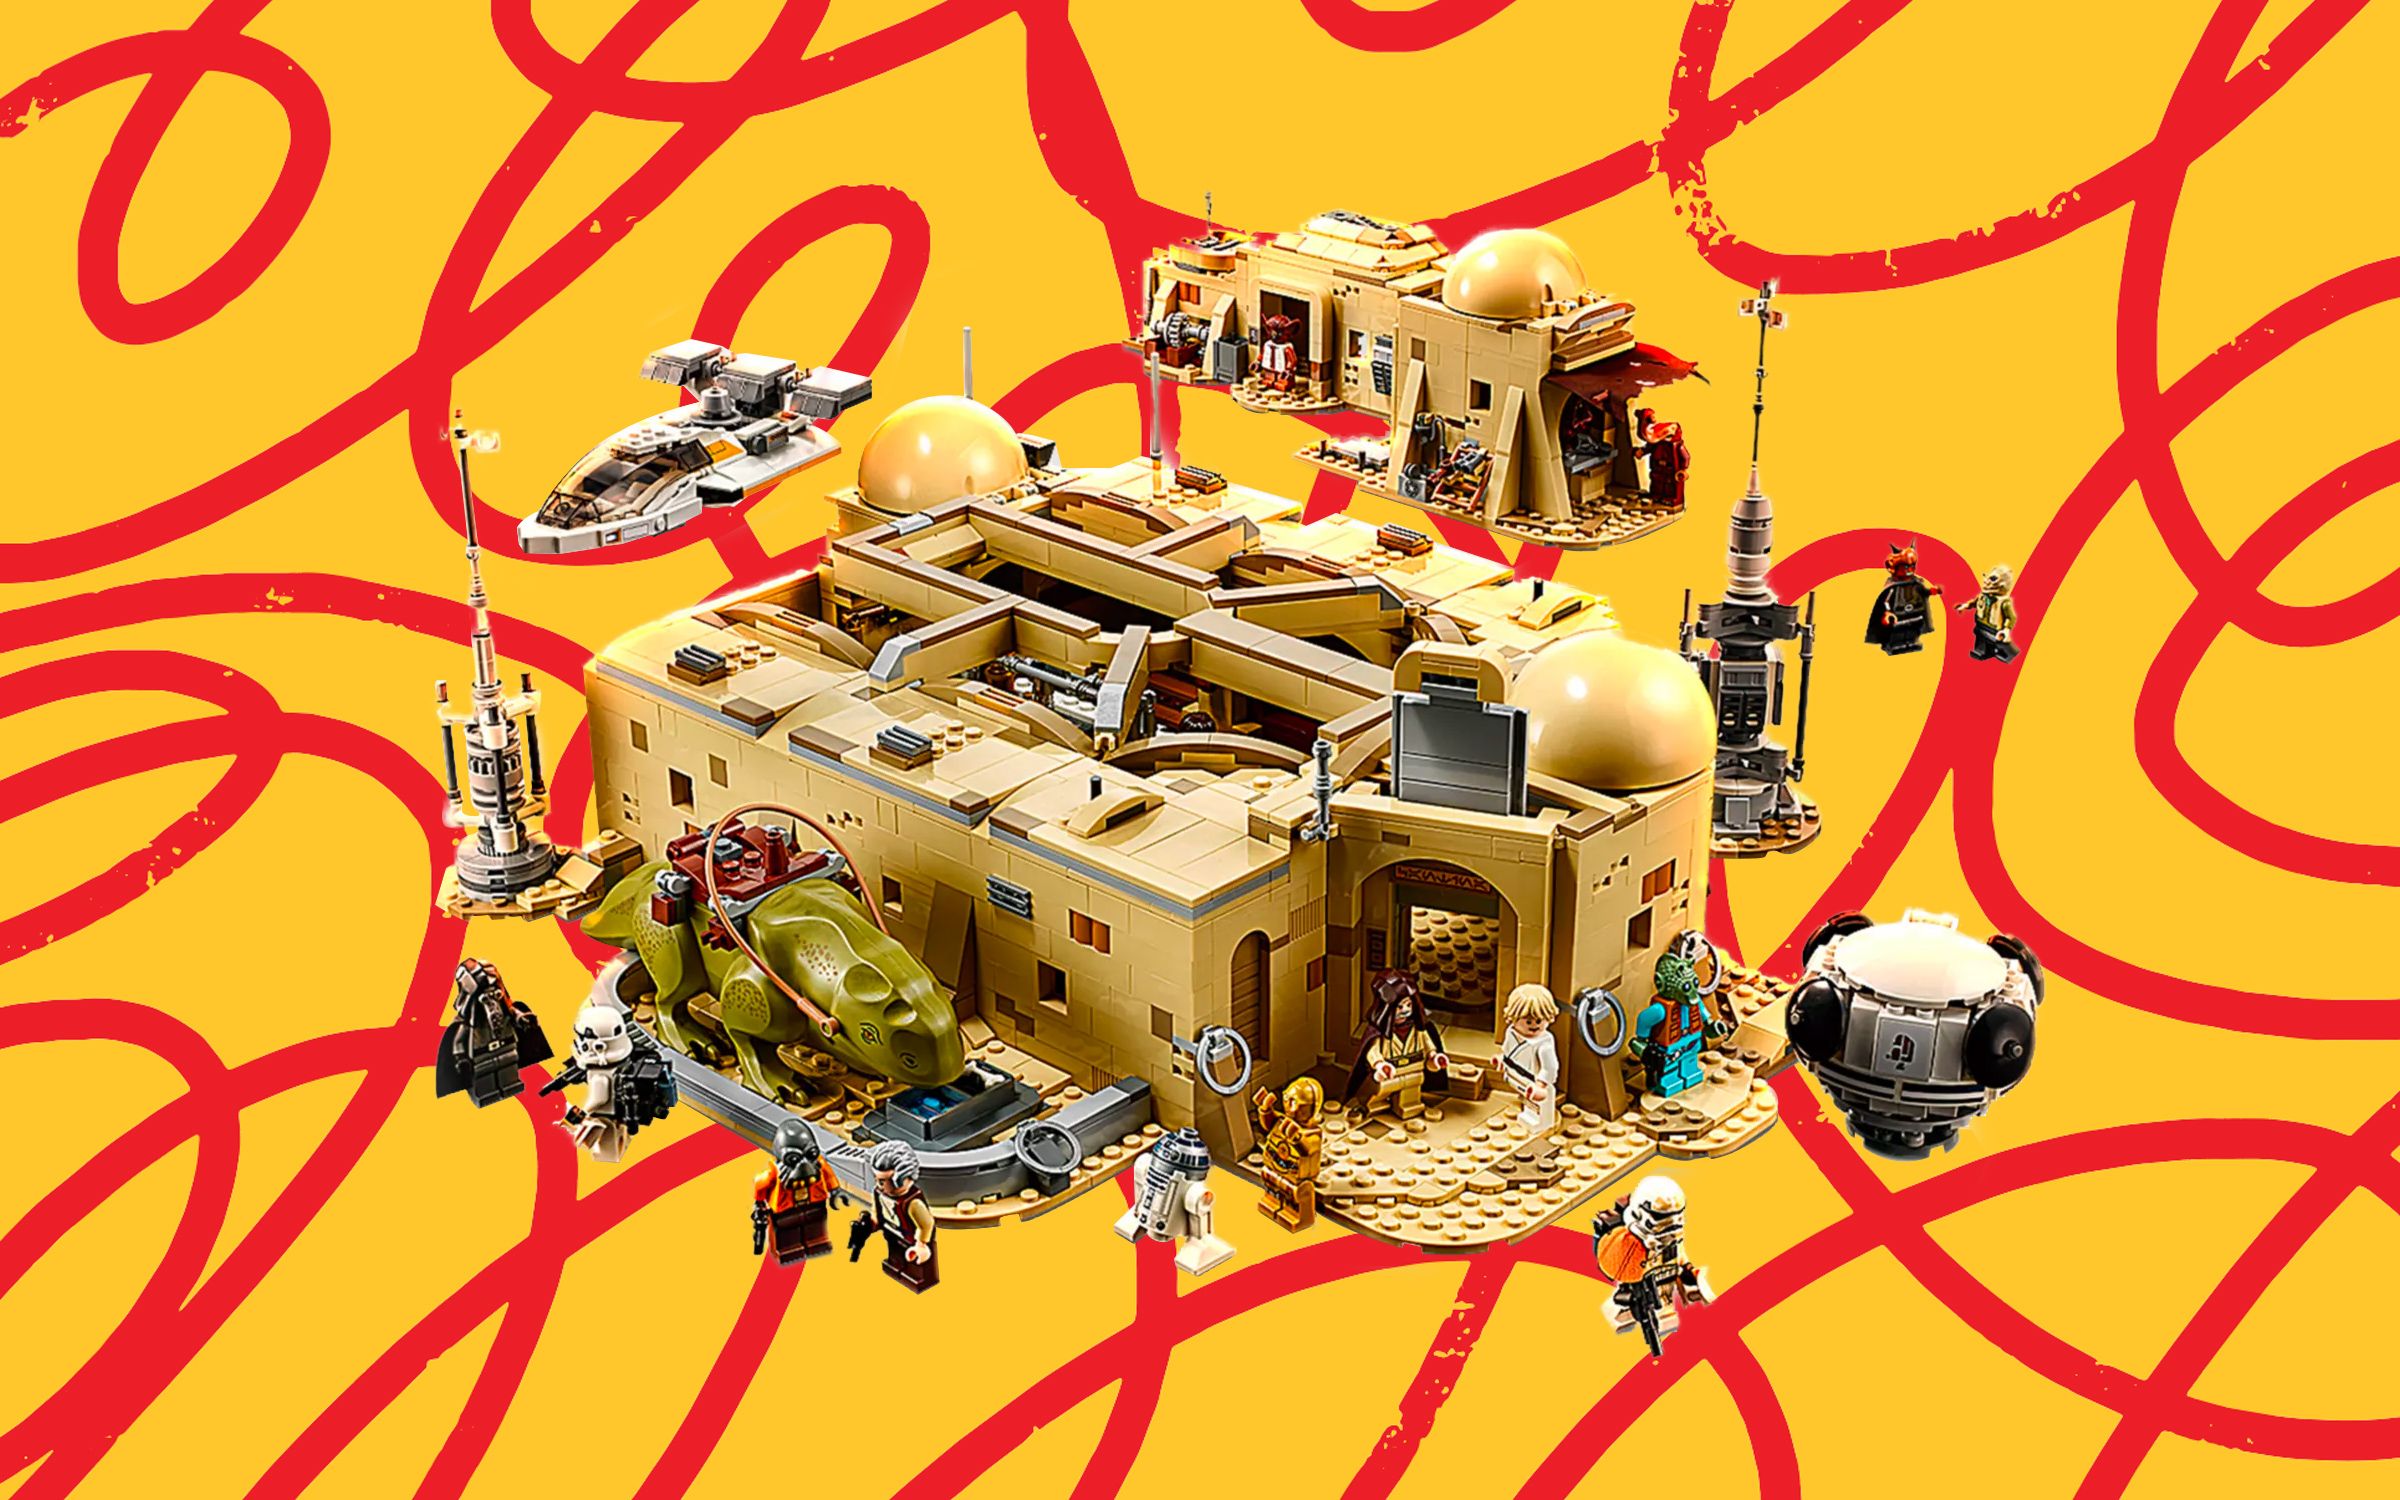 From Lego to Disney here’s our ultimate picks of the toys currently on sale